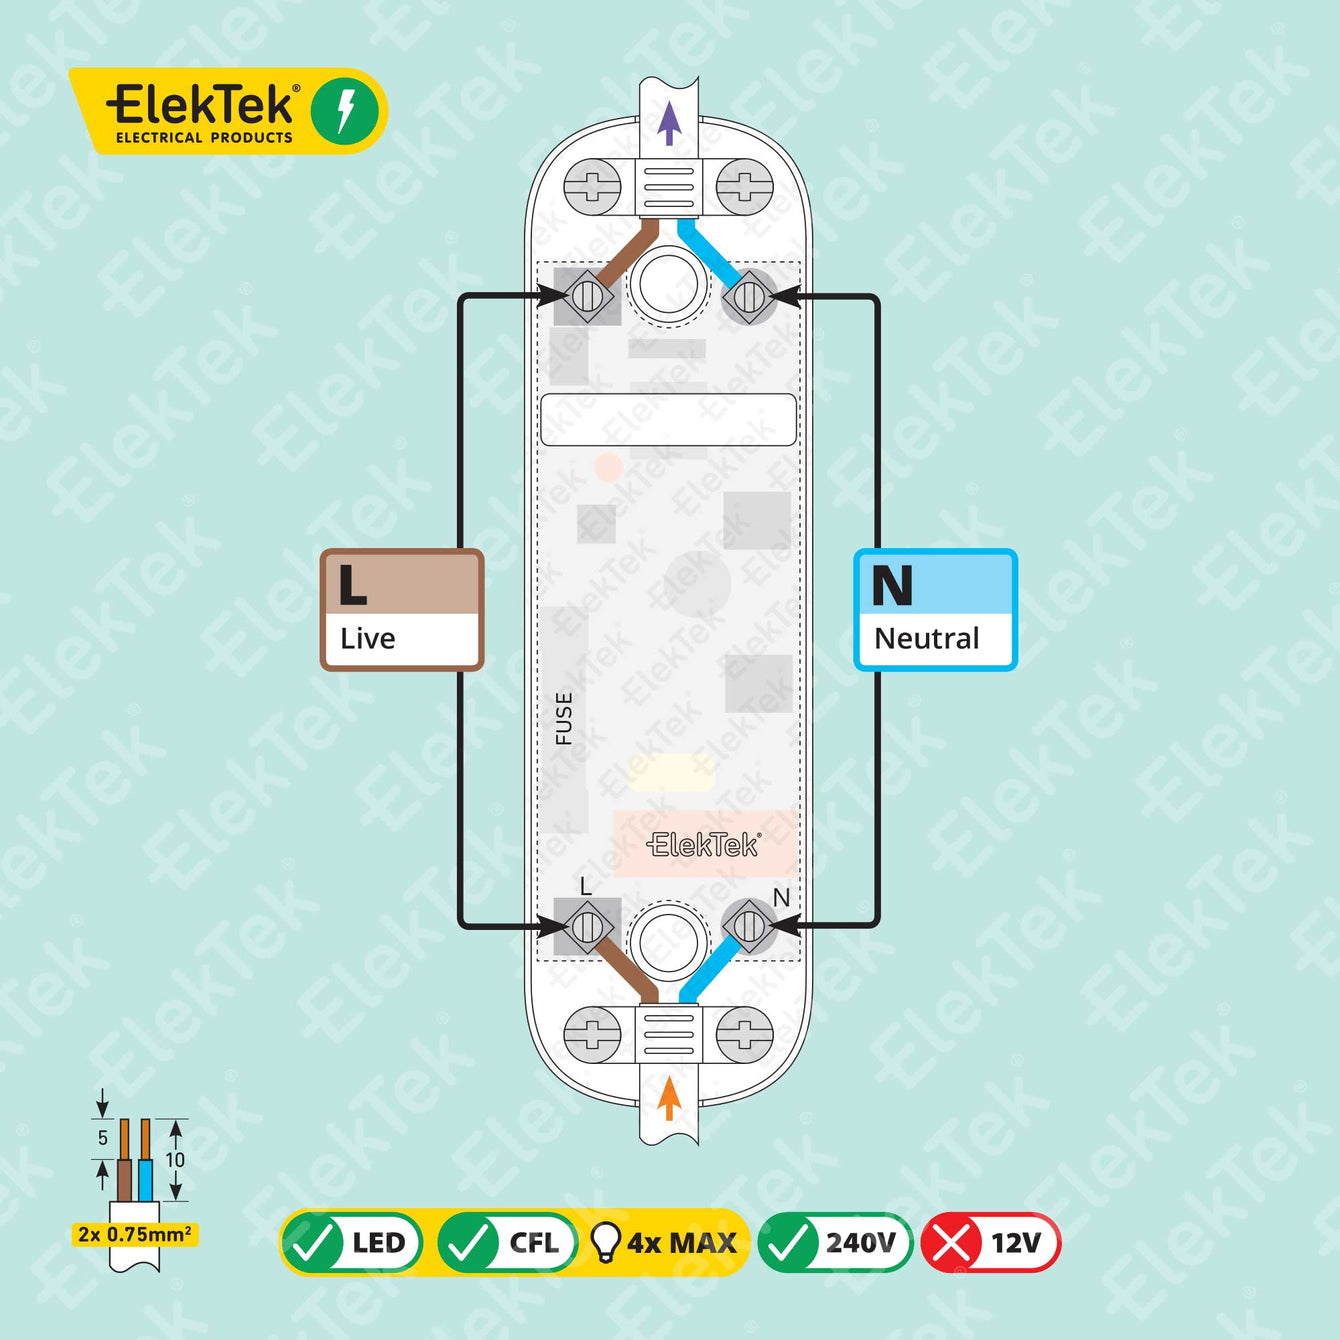 ElekTek LED Compatible Universal In Line Push Button Dimmer Switch 240v AC 2 Core Suitable For LED CFL & Incandescent Bulbs White 